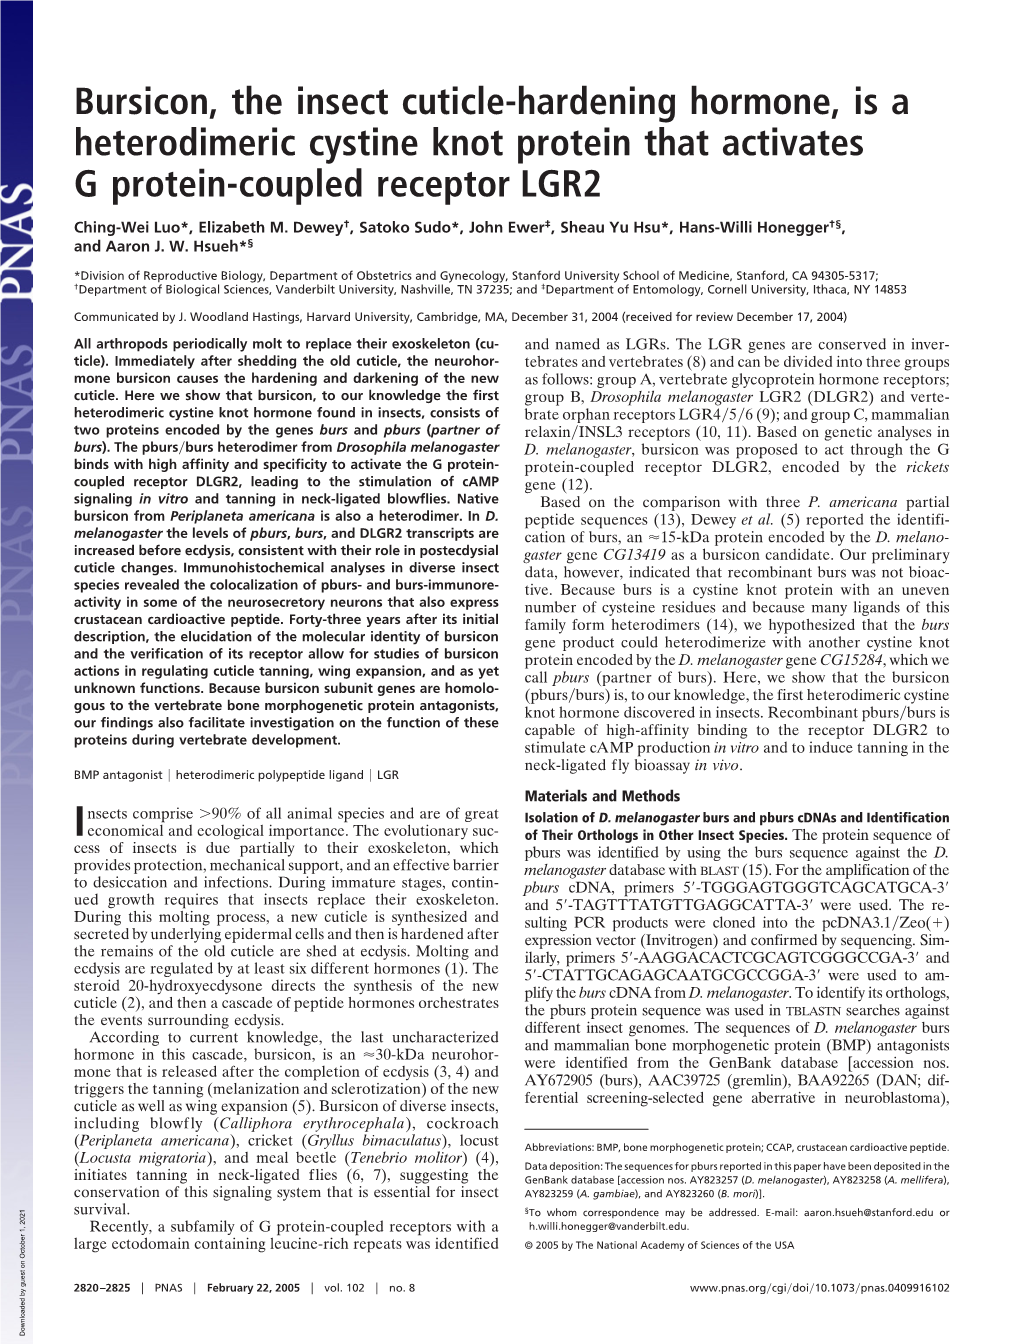 Bursicon, the Insect Cuticle-Hardening Hormone, Is a Heterodimeric Cystine Knot Protein That Activates G Protein-Coupled Receptor LGR2